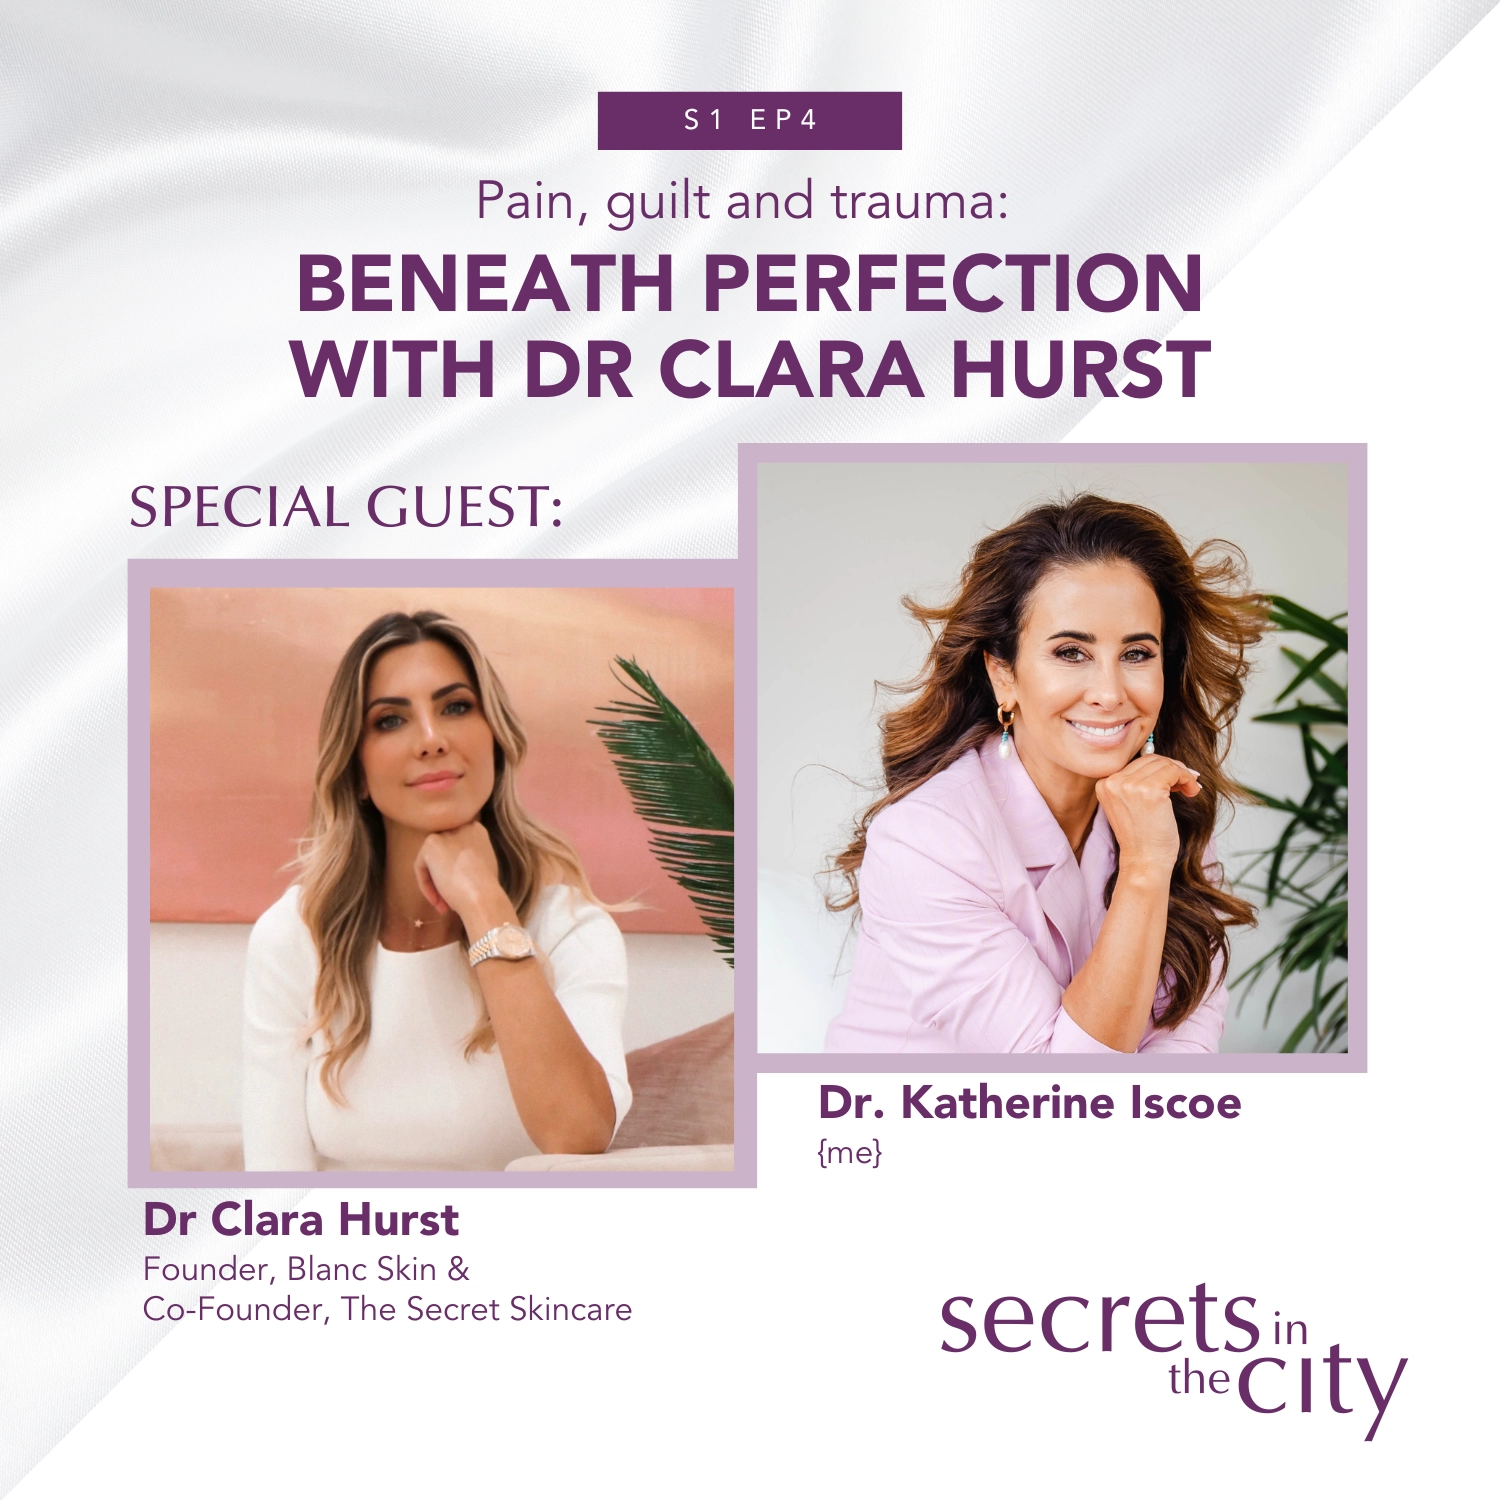 The Pain, Guilt and Trauma Beneath Perfection - Secrets in the City podcast cover featuring photos of Dr. Clara Hurst and Dr. Katherine Iscoe